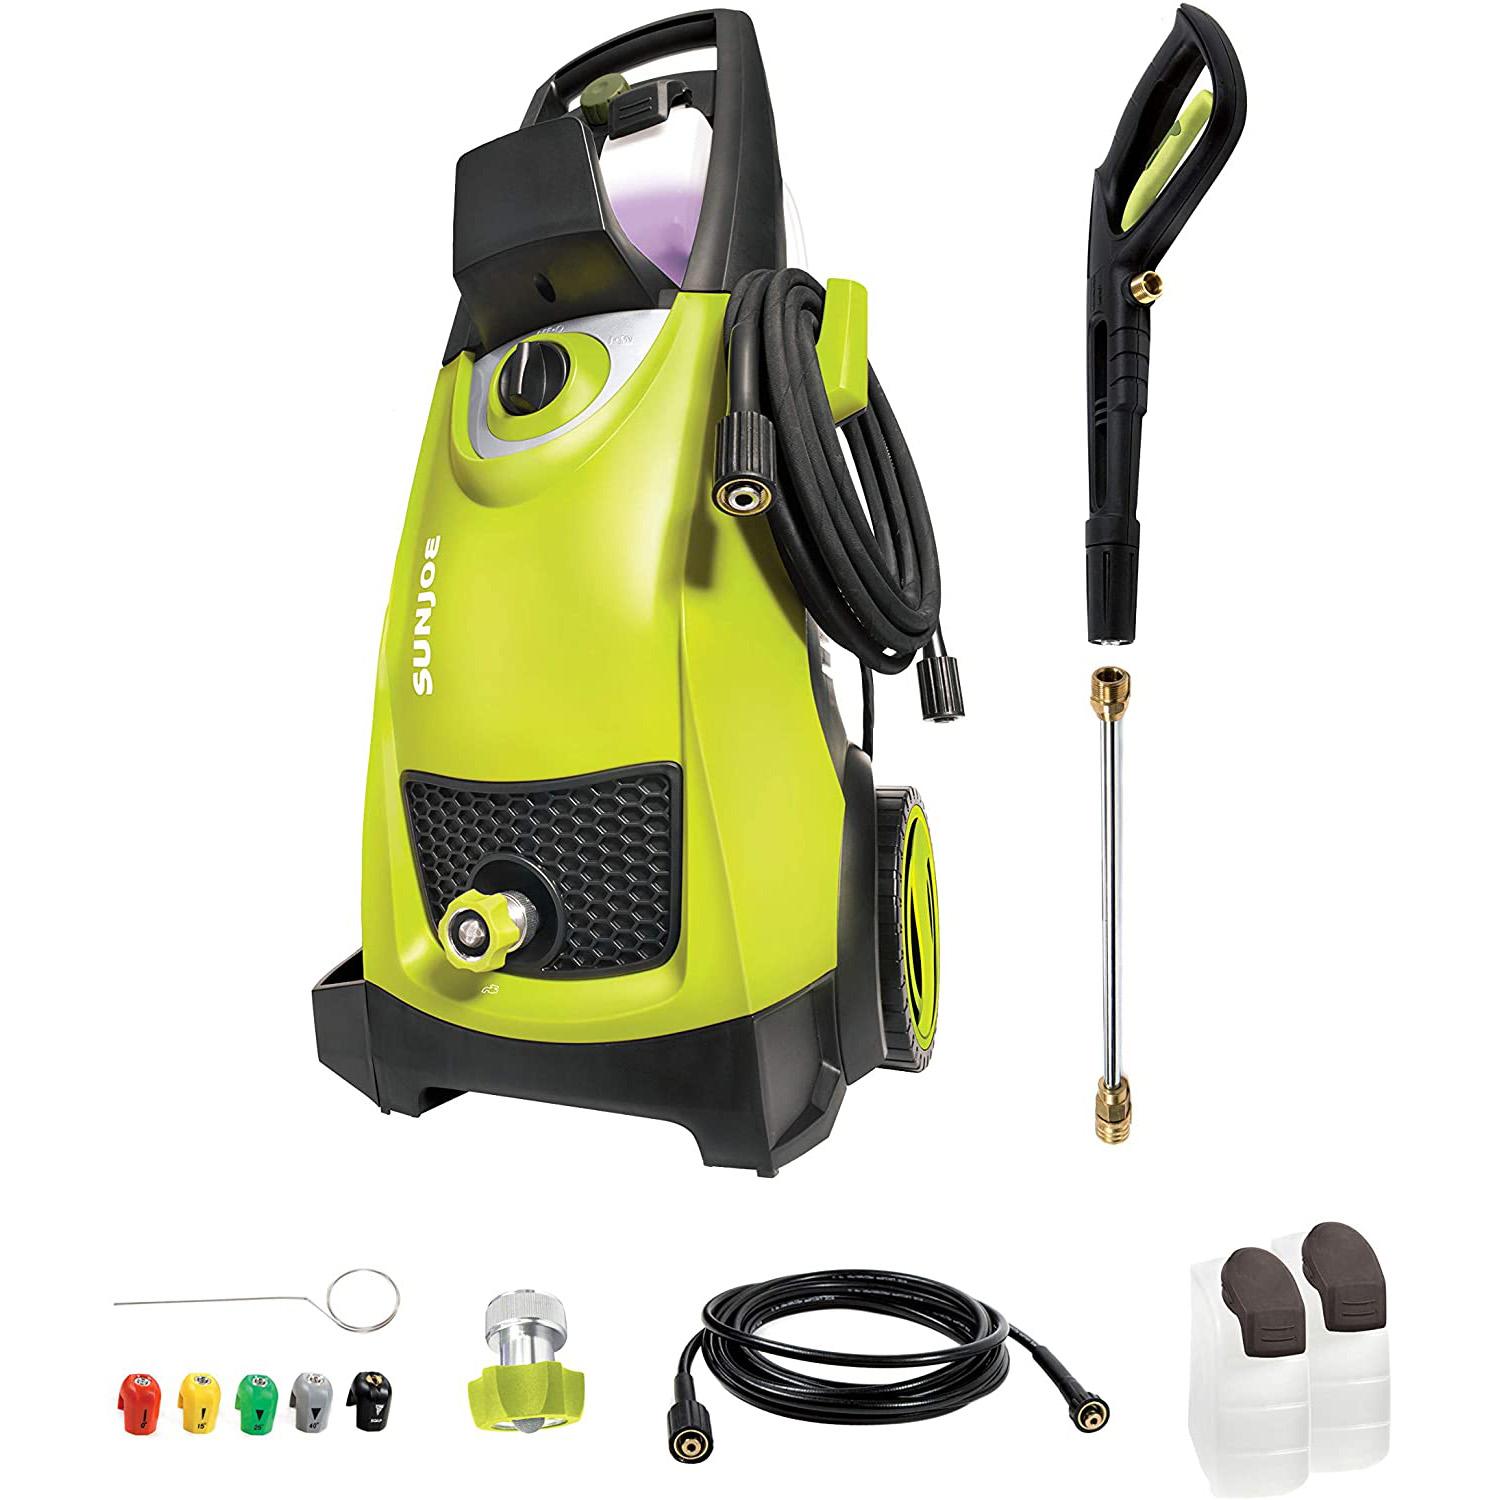 Sun Joe SPX3000 2030 Max Psi 14.5a Electric Pressure Washer for $122 Shipped